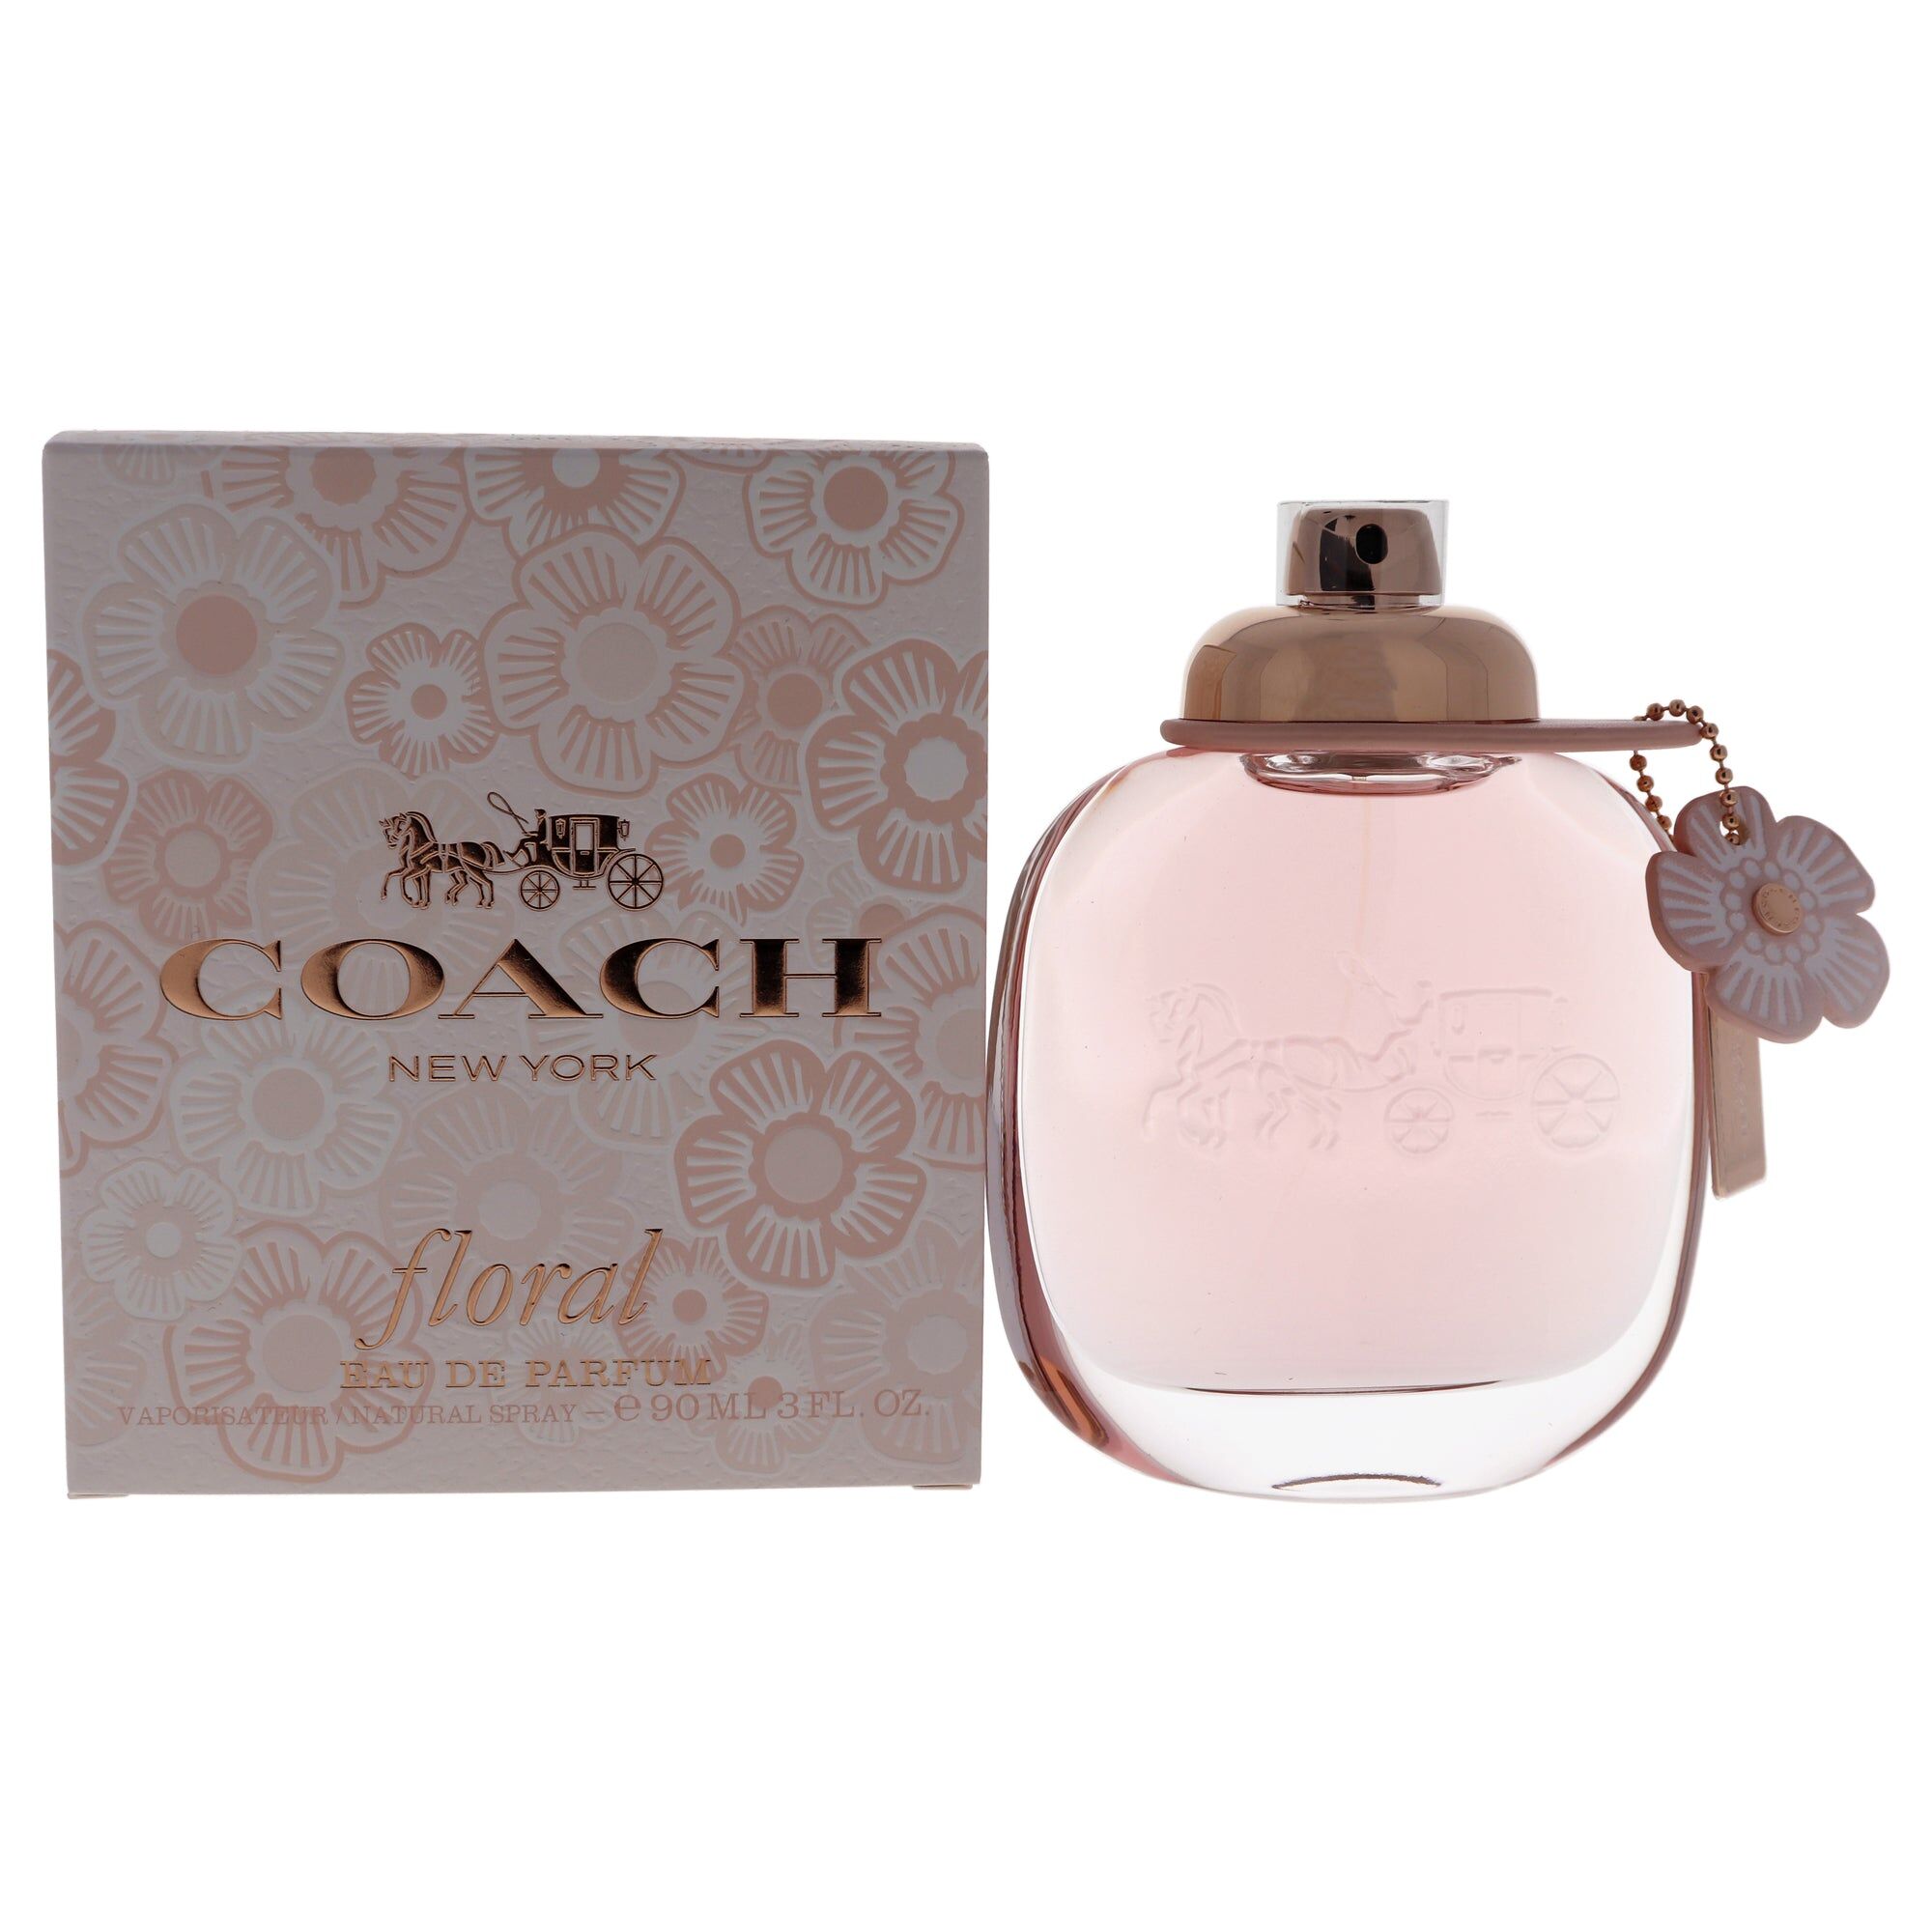 Coach Floral by Coach for Women - 3 oz EDP Spray Small female